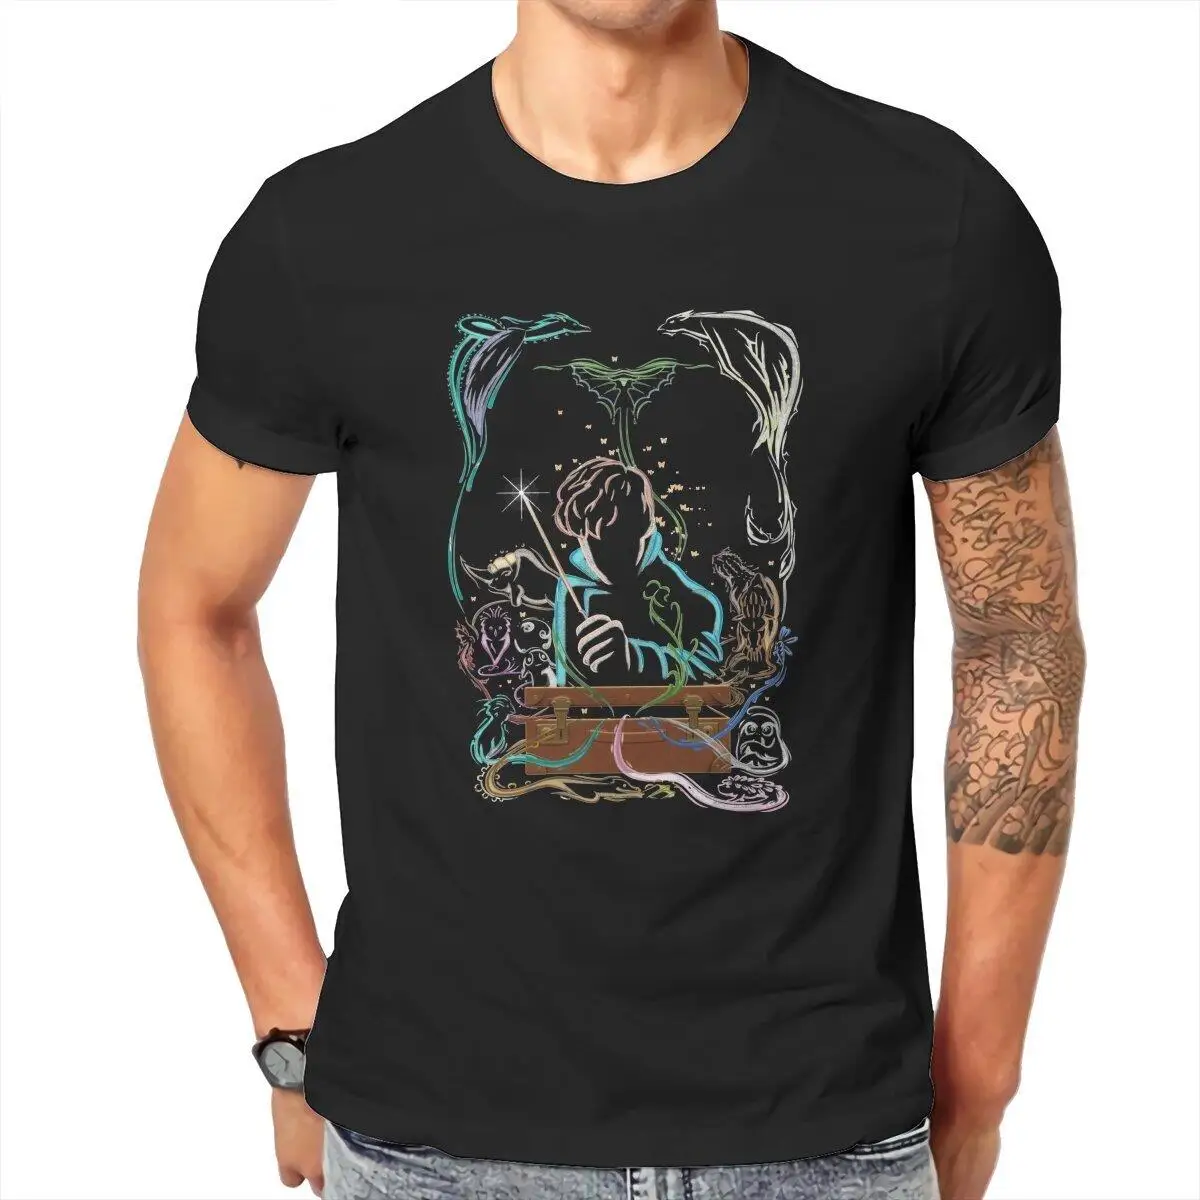 Men Magical Creatures  T Shirt  Cotton Clothes Novelty Short Sleeve Round Neck Tee Shirt Graphic T-Shirts